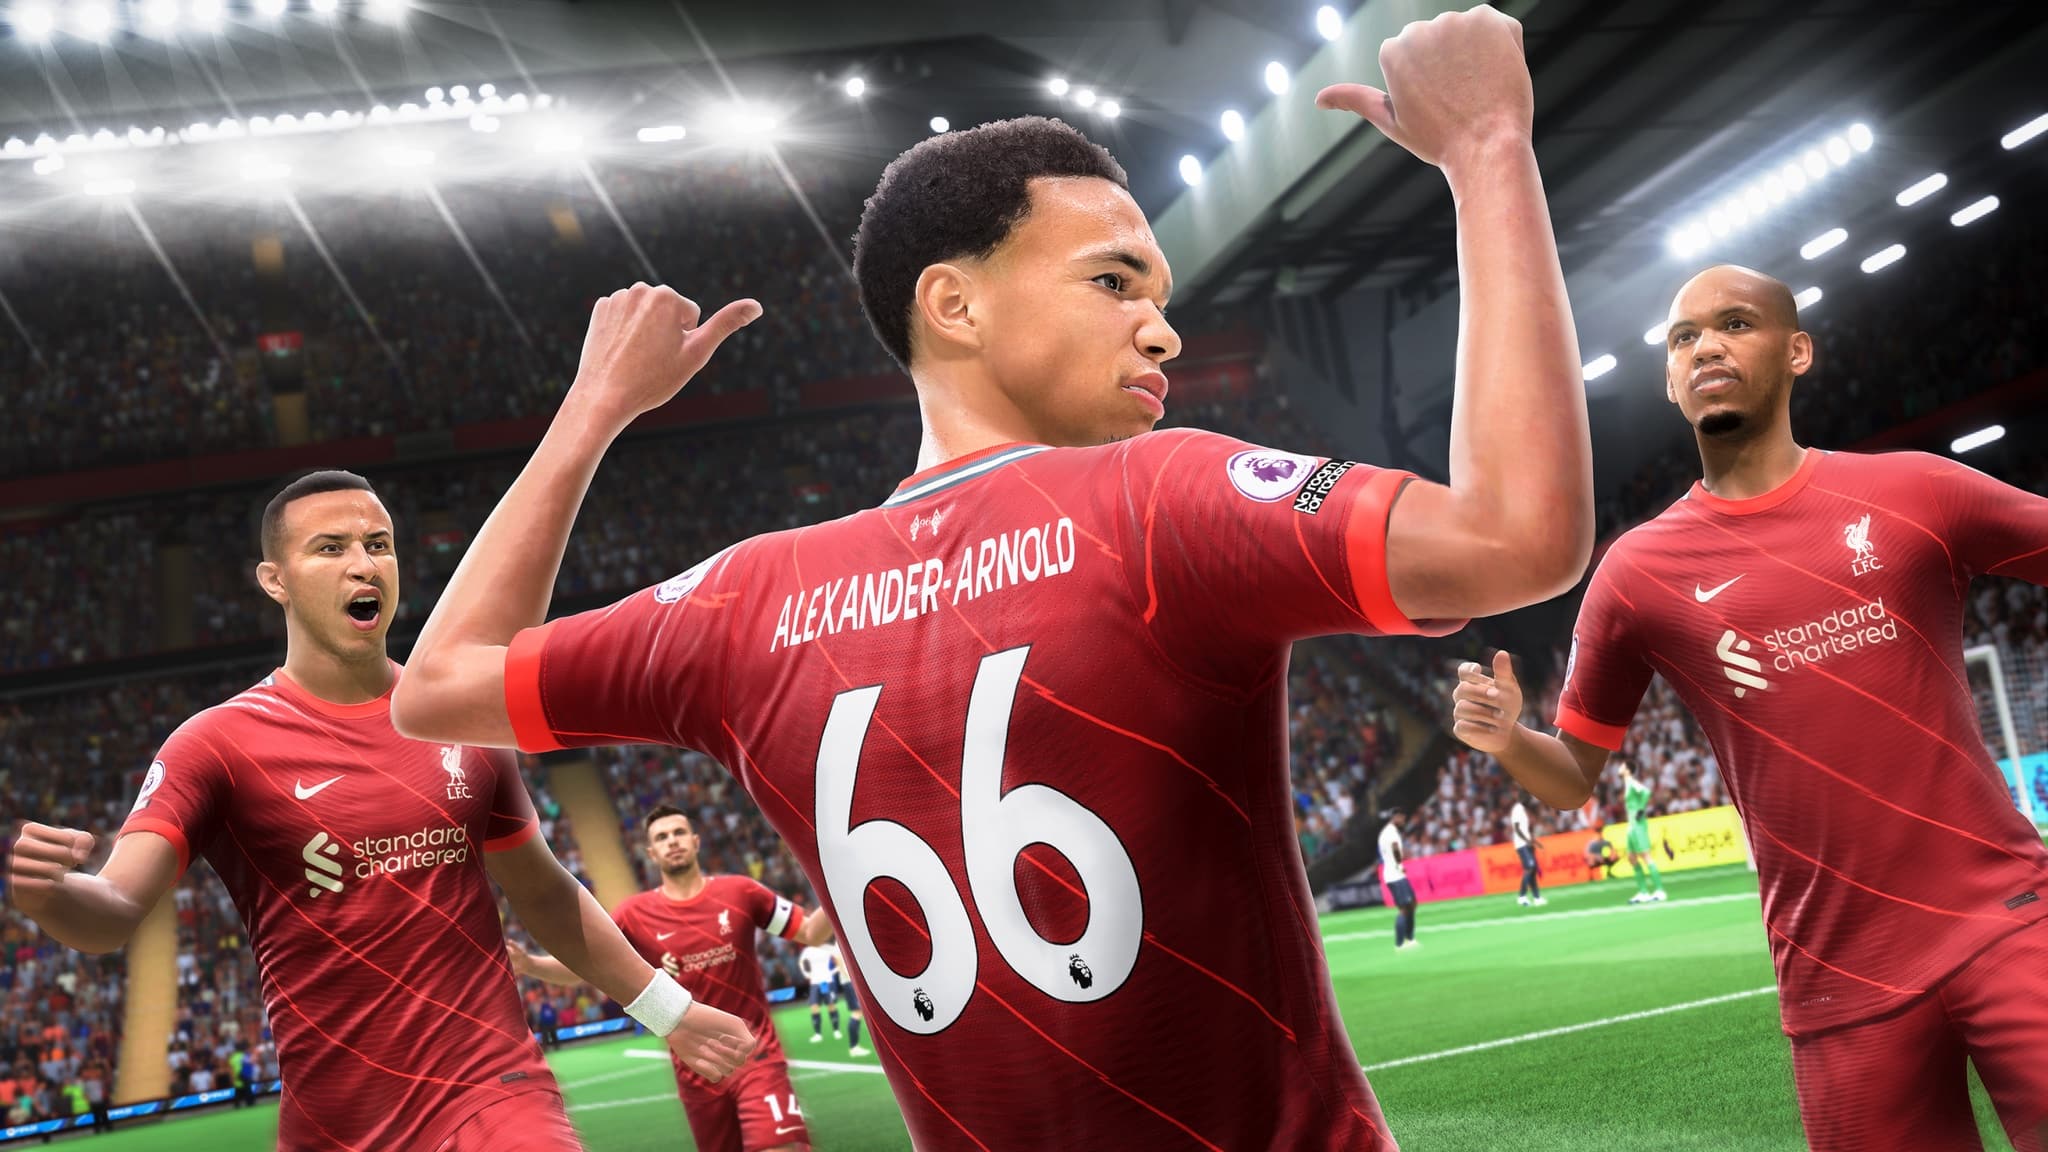 EA Sports has delisted its FIFA back catalogue from digital